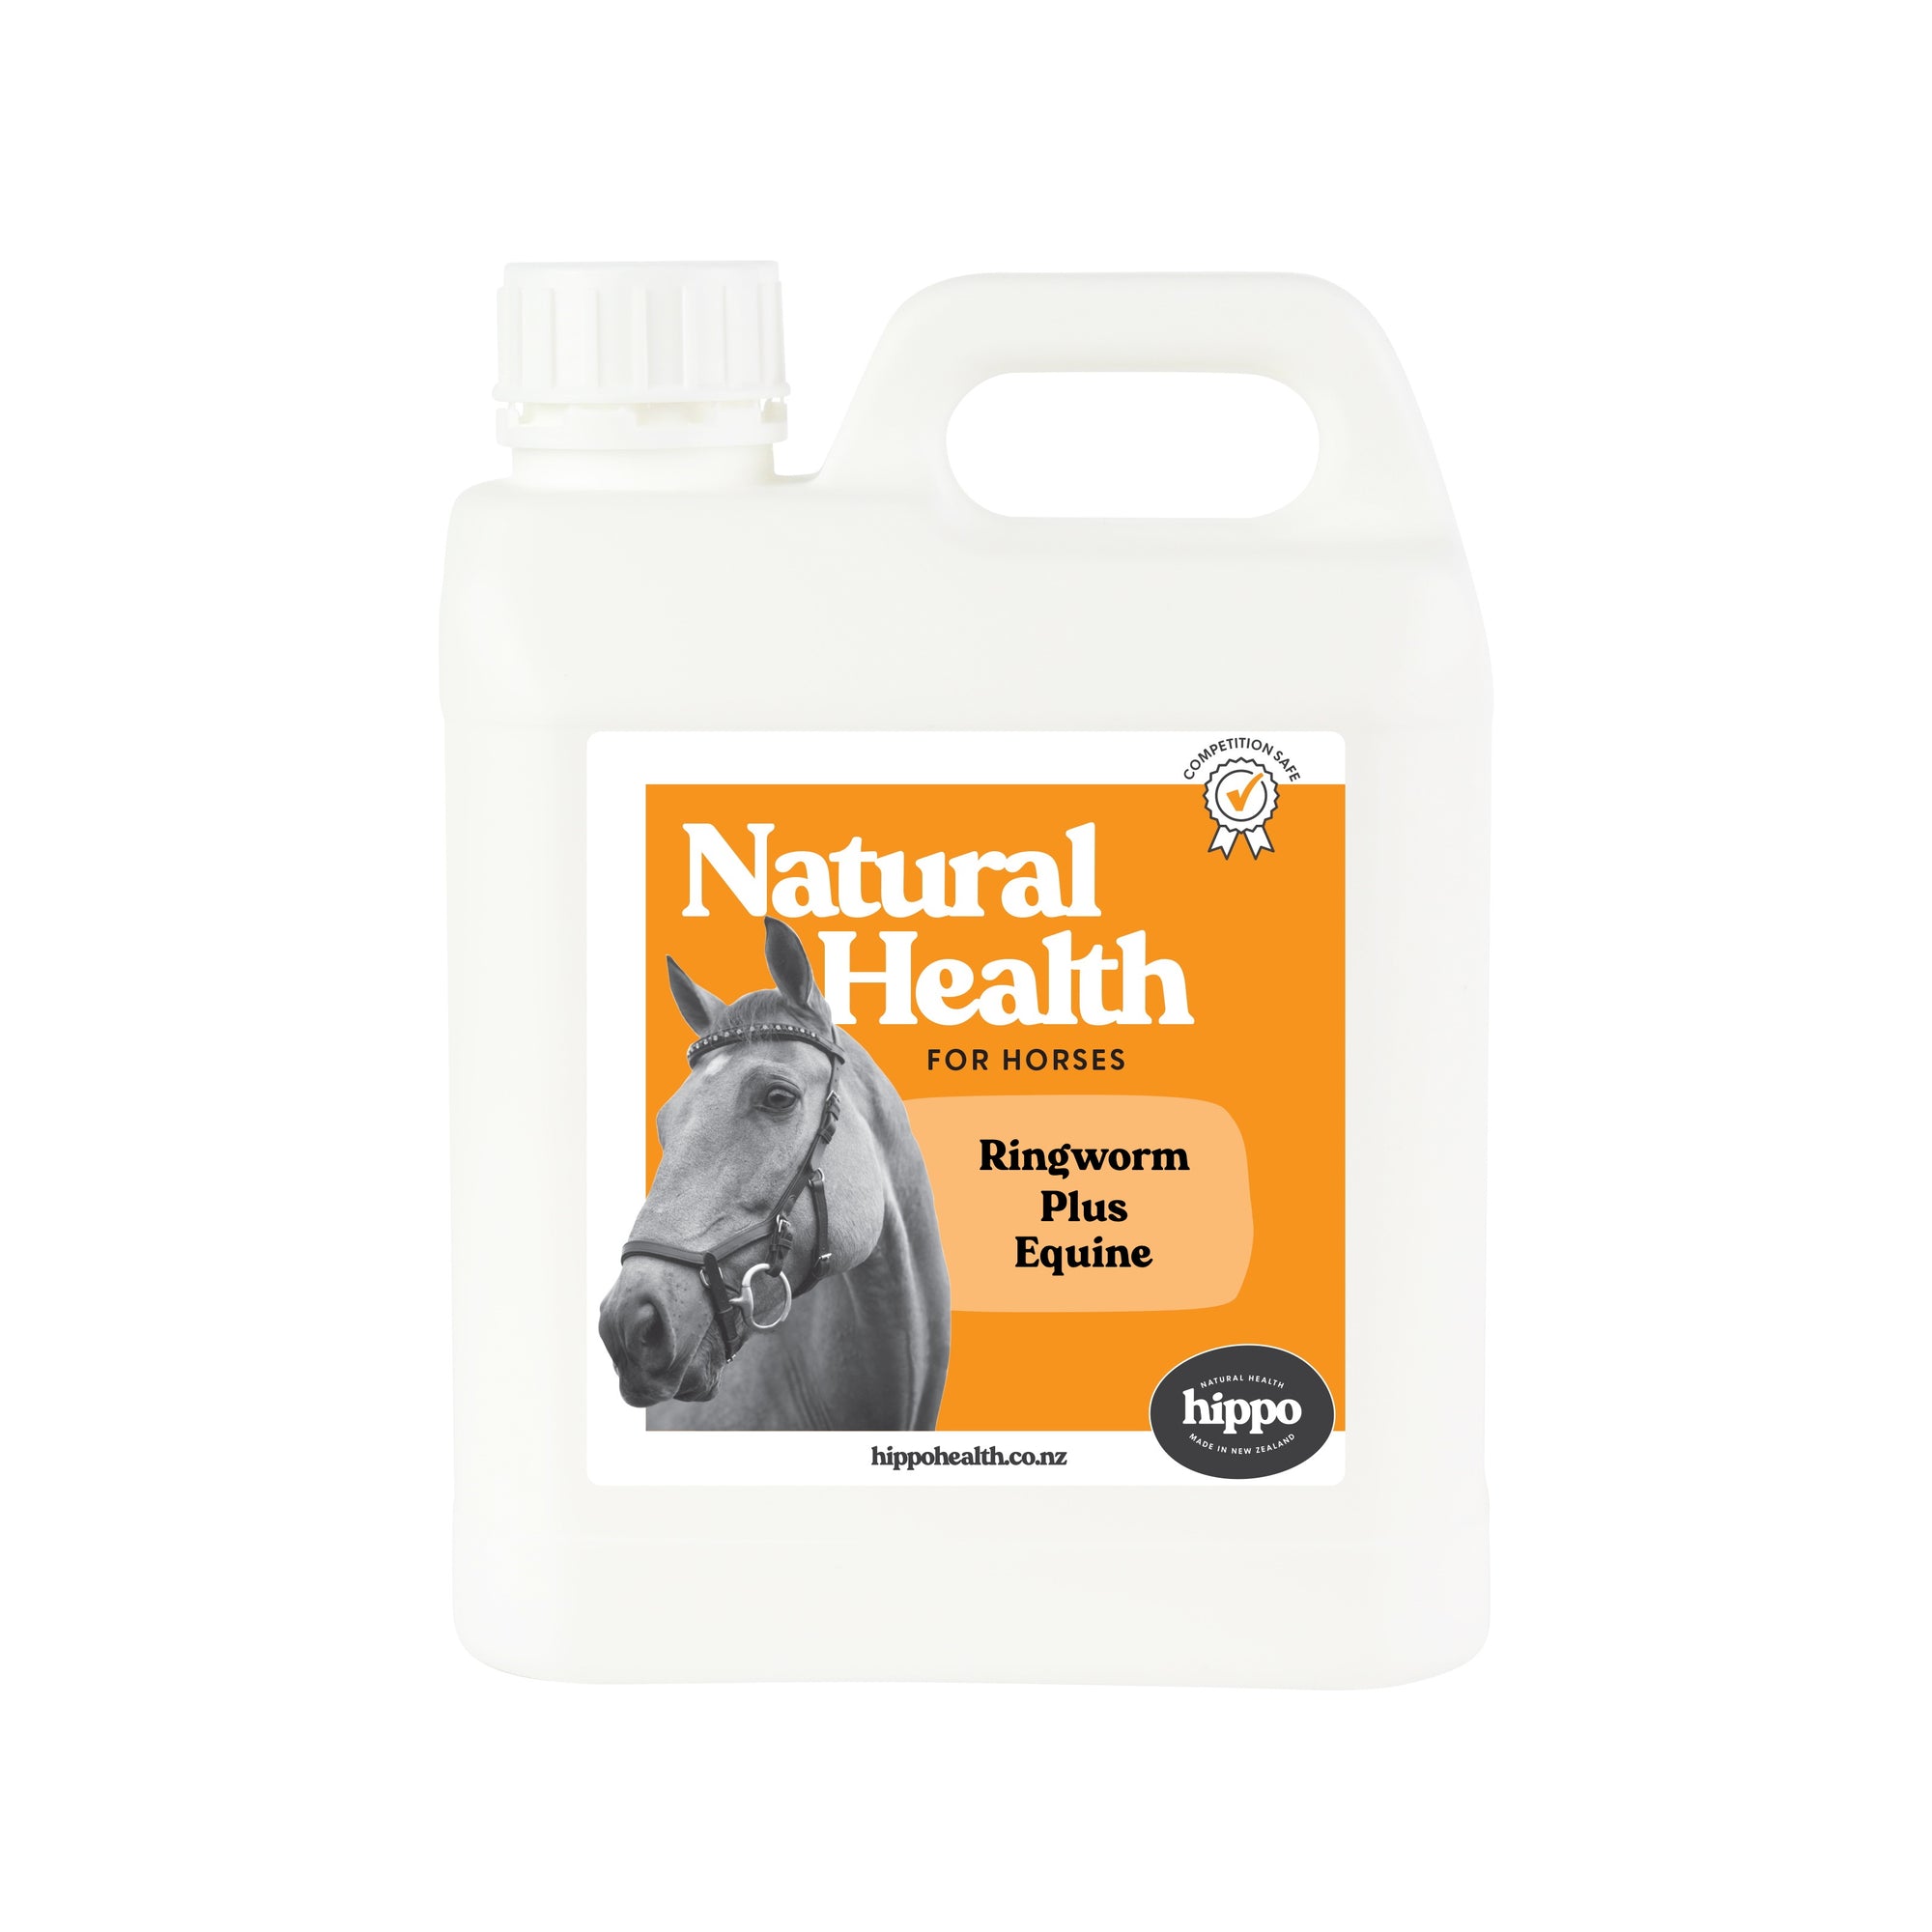 Ringworm Plus - Equine for Horse | Hippo Health